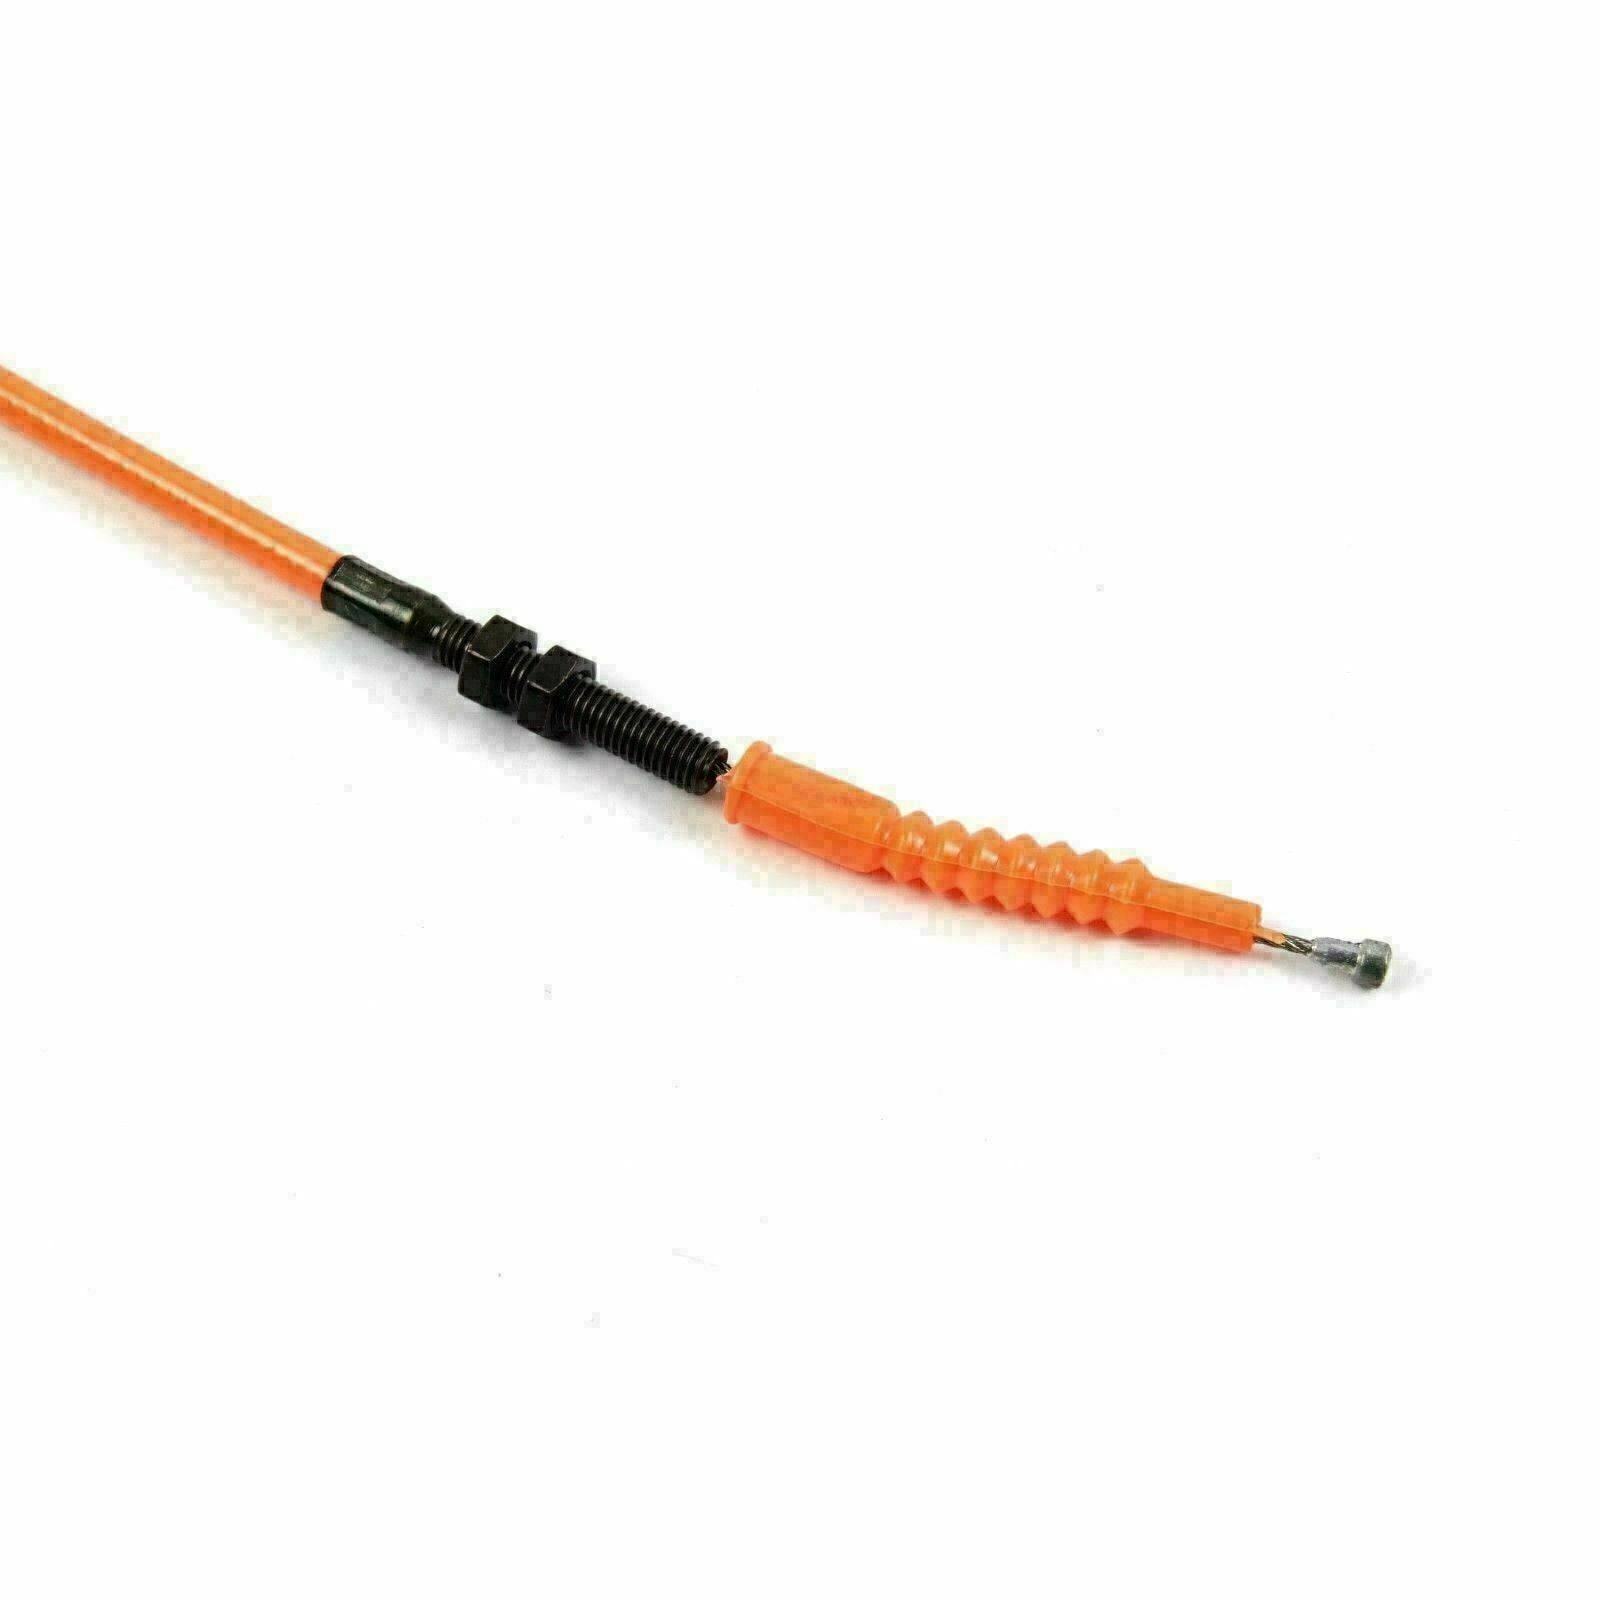 Orange Motorcycle OEM Clutch Cable Line Wire for Yamaha YZF-R1 R1 2004 2005 2006 - TDRMOTO